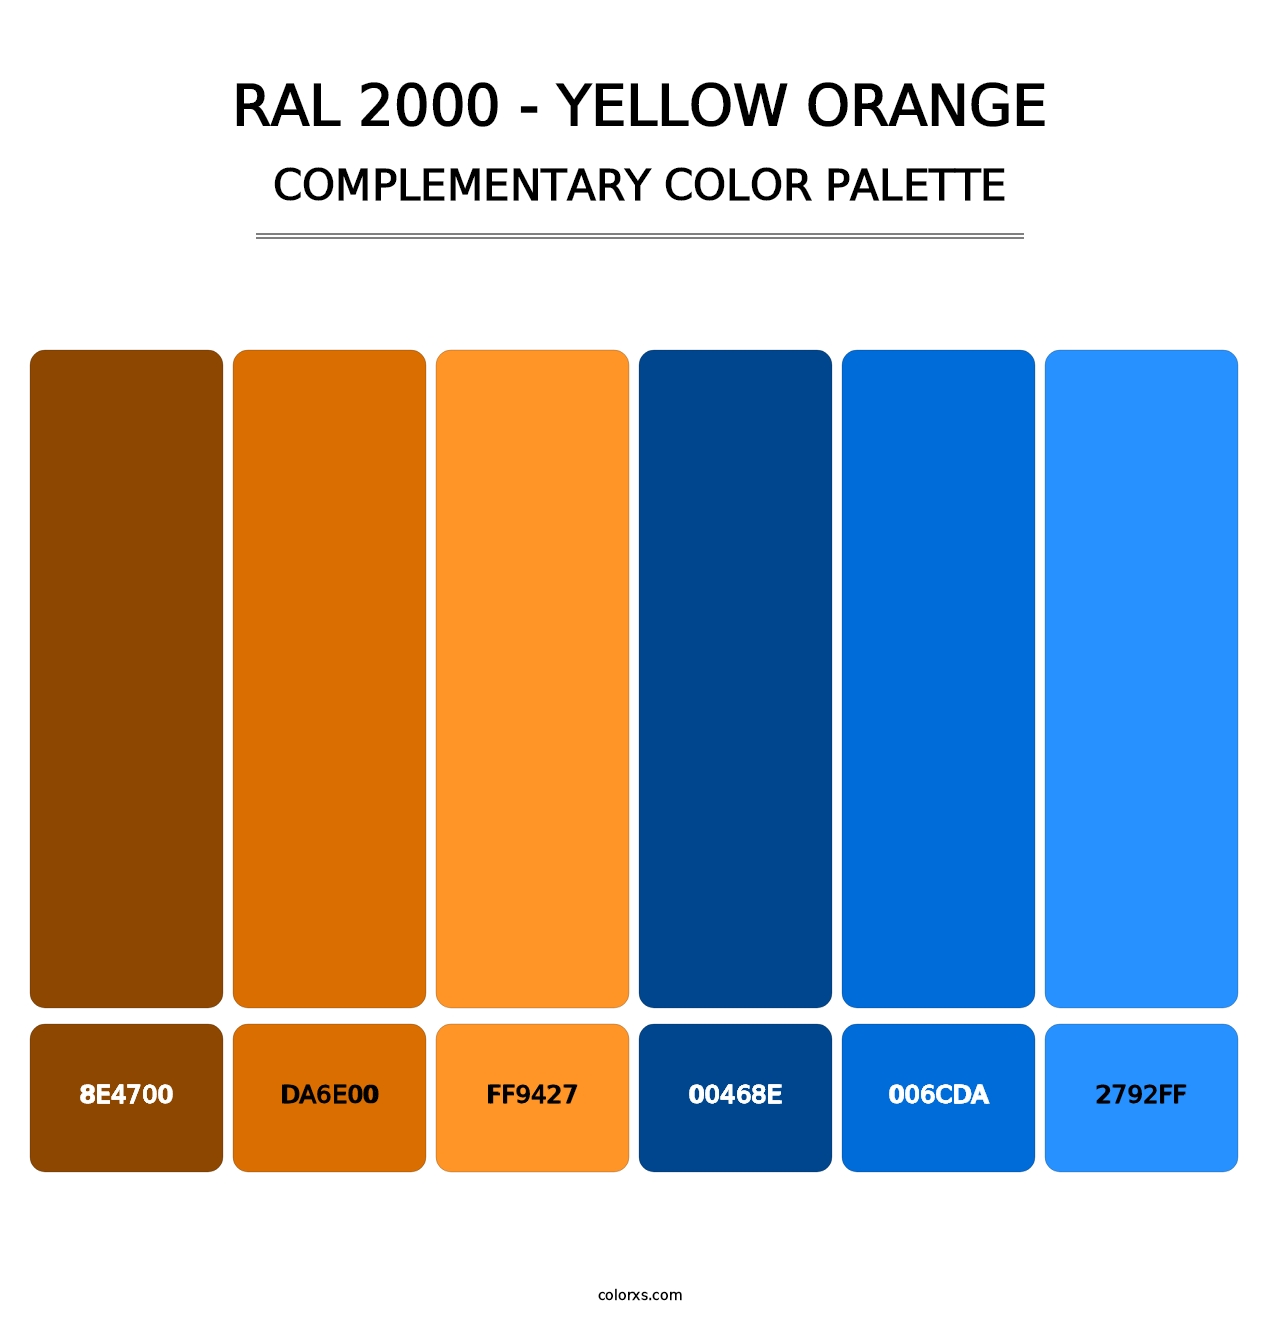 RAL 2000 - Yellow Orange - Complementary Color Palette